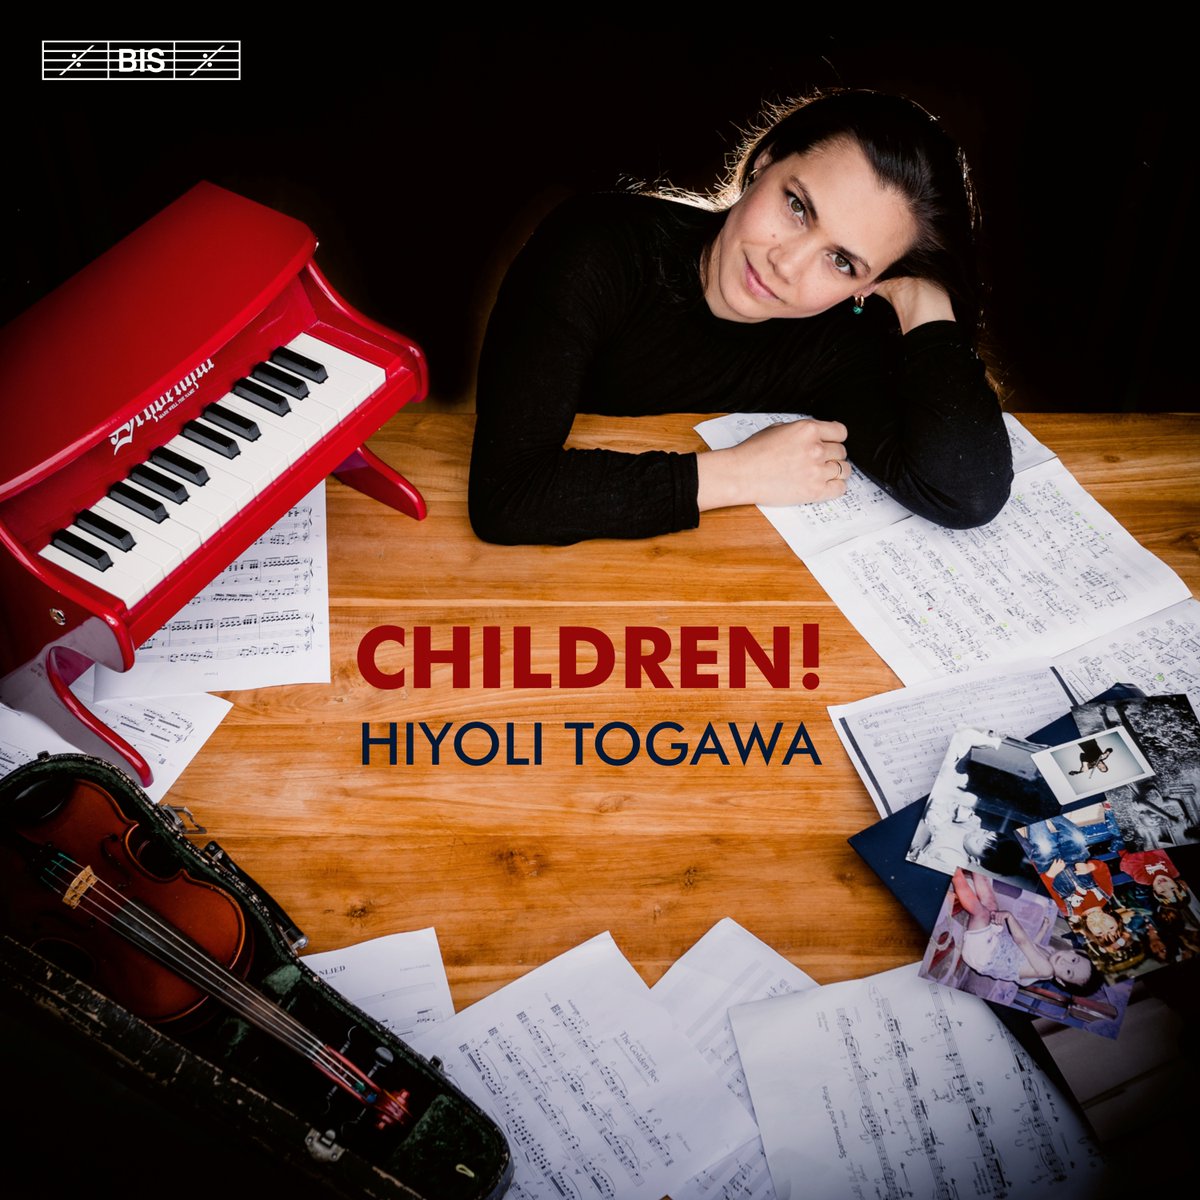 Out today! 🎉 For children and children at heart 🐻 🎶 Songs & Lullabies. LISTEN HERE! bisrecords.lnk.to/2643 Connect to your inner child 🛝with Hiyoli Togawa's CHILDREN! viola #musicforchildren #viola #lullabies #viola #chambermusic